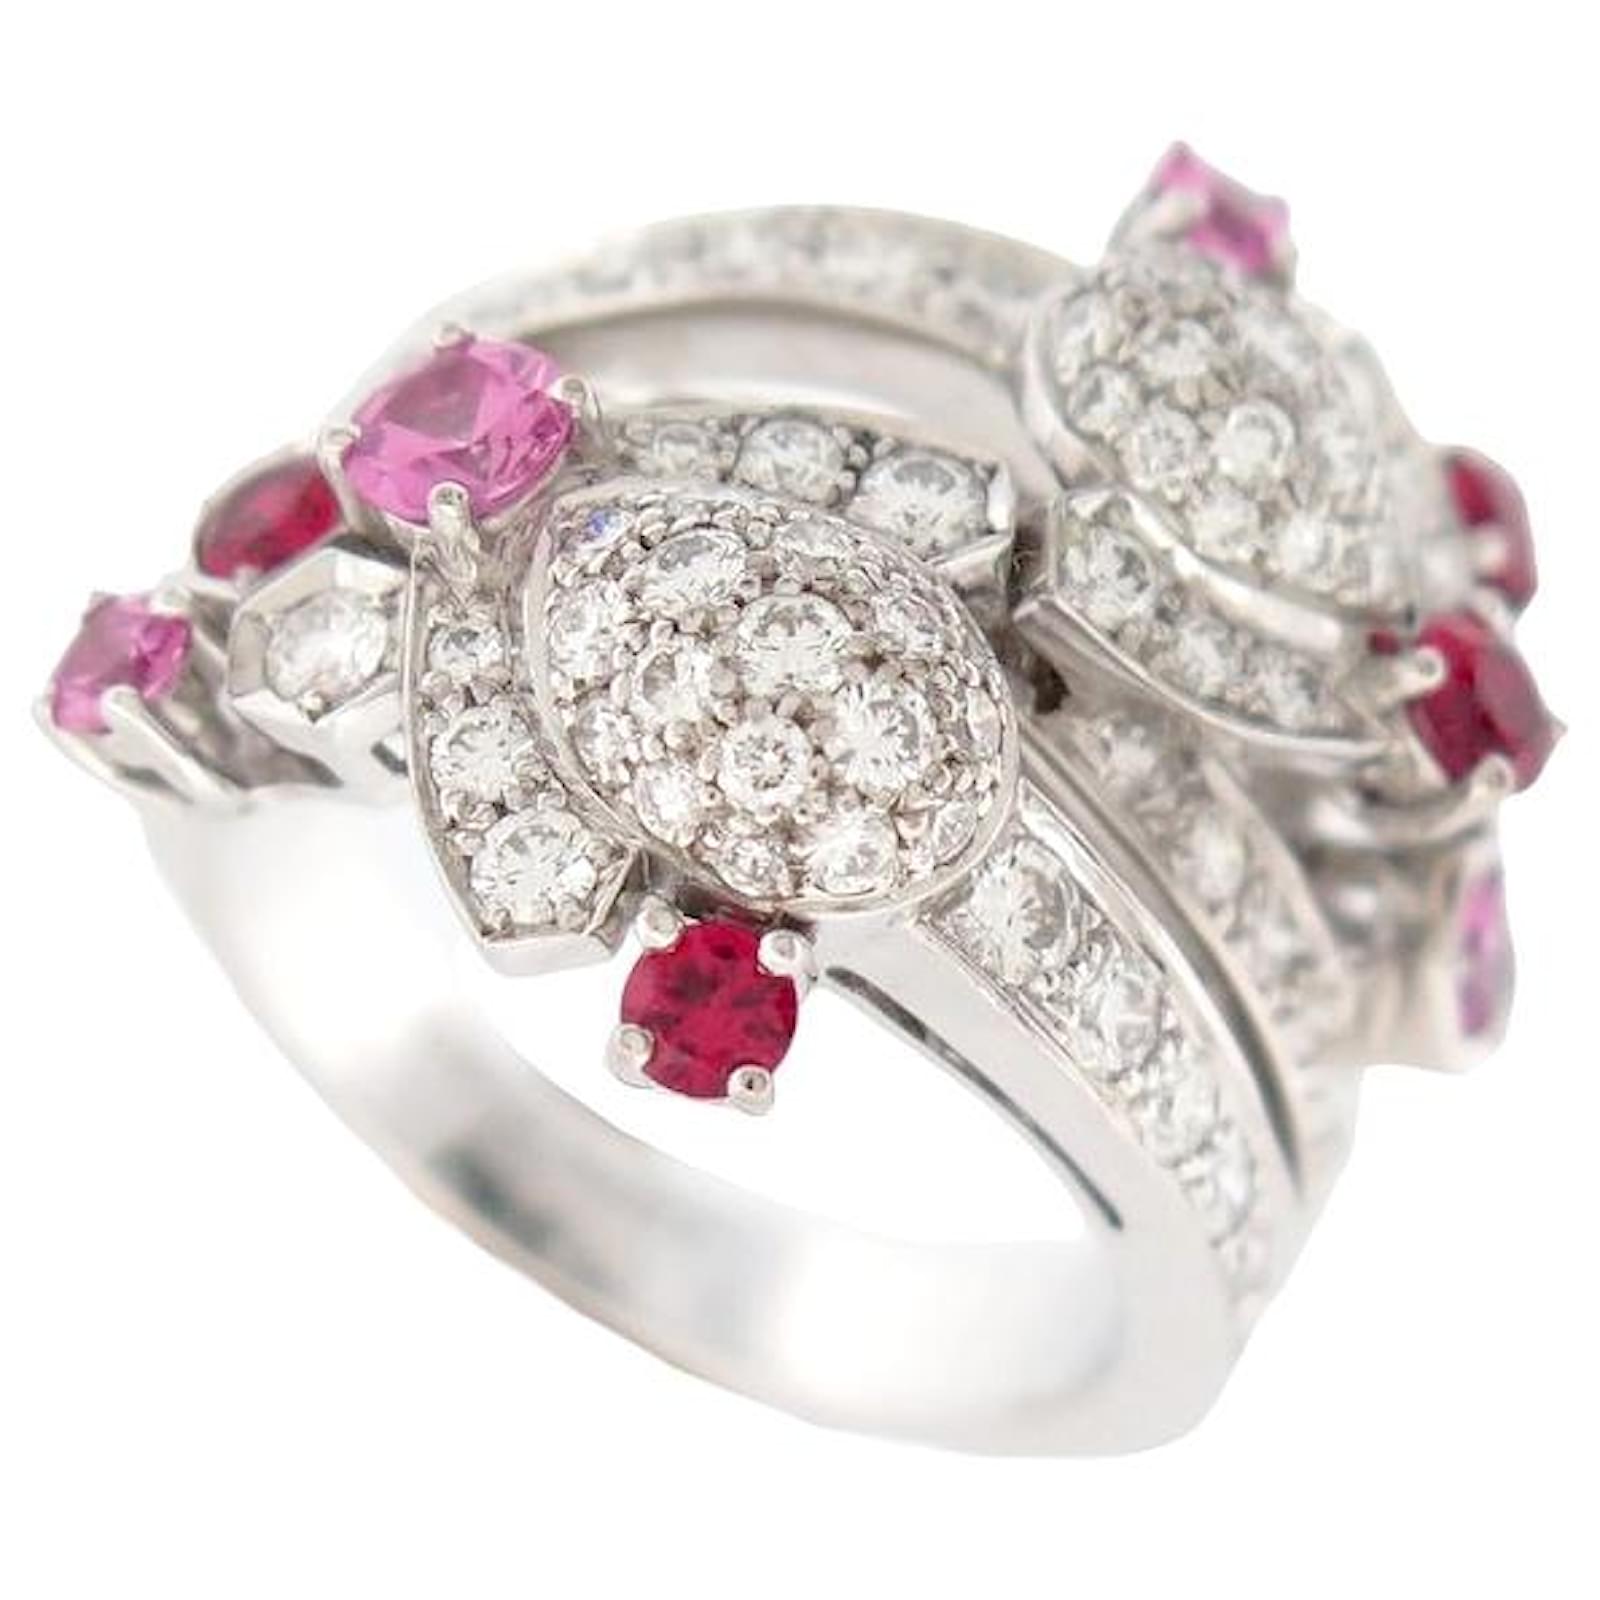 Engagement rings by Chaumet - Rings in gold, platinum or diamonds